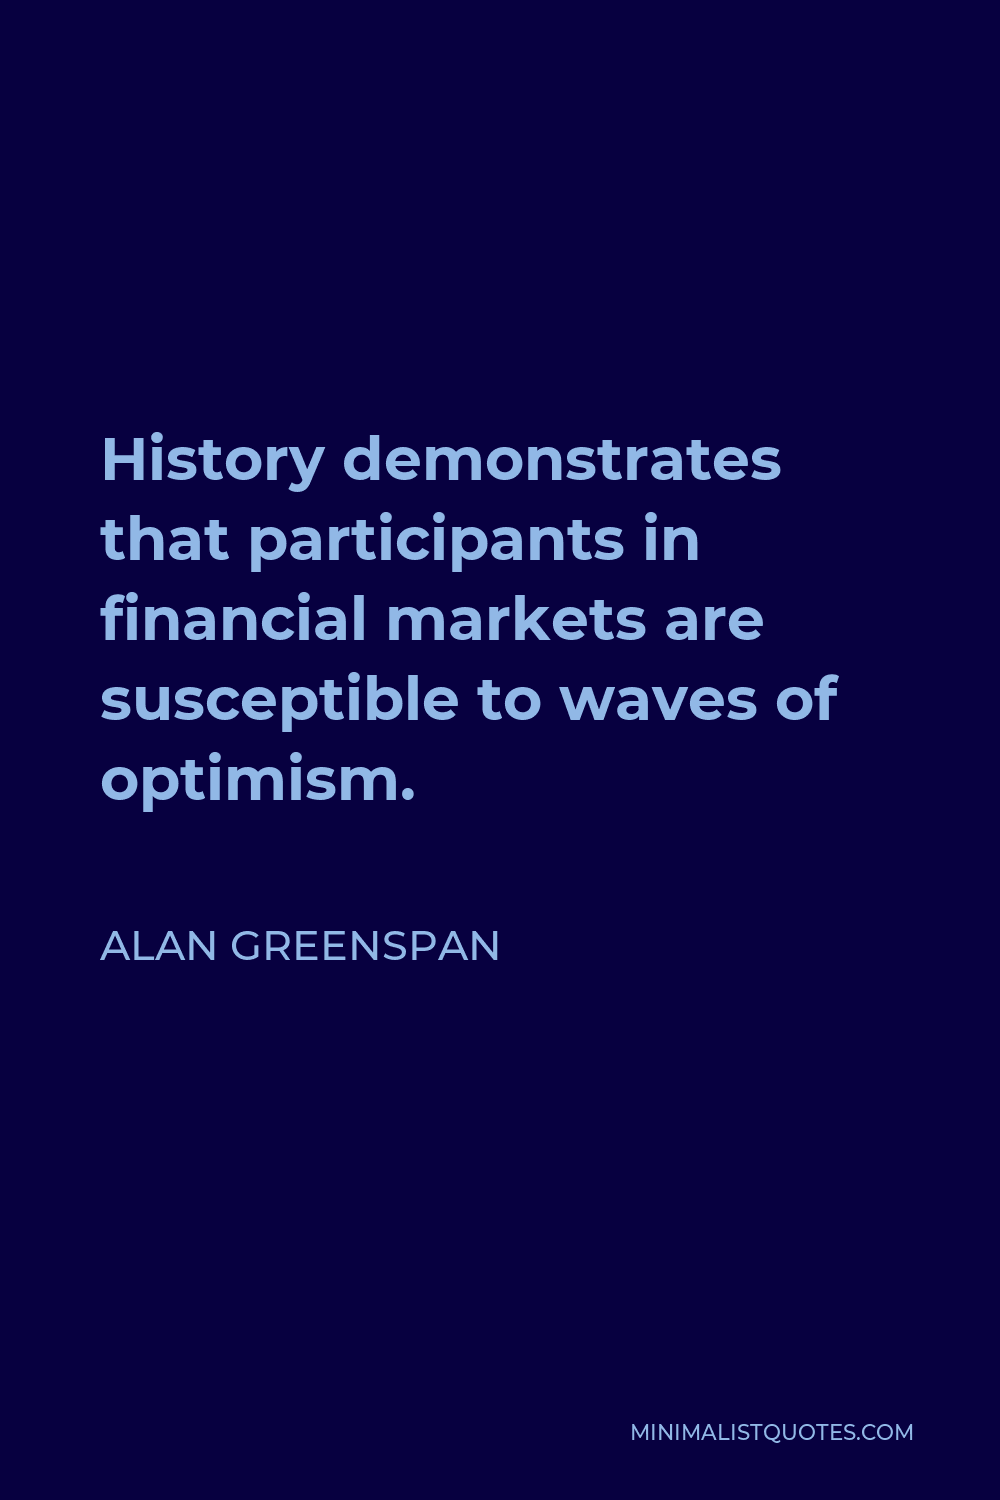 Alan Greenspan Quote - History demonstrates that participants in financial markets are susceptible to waves of optimism.